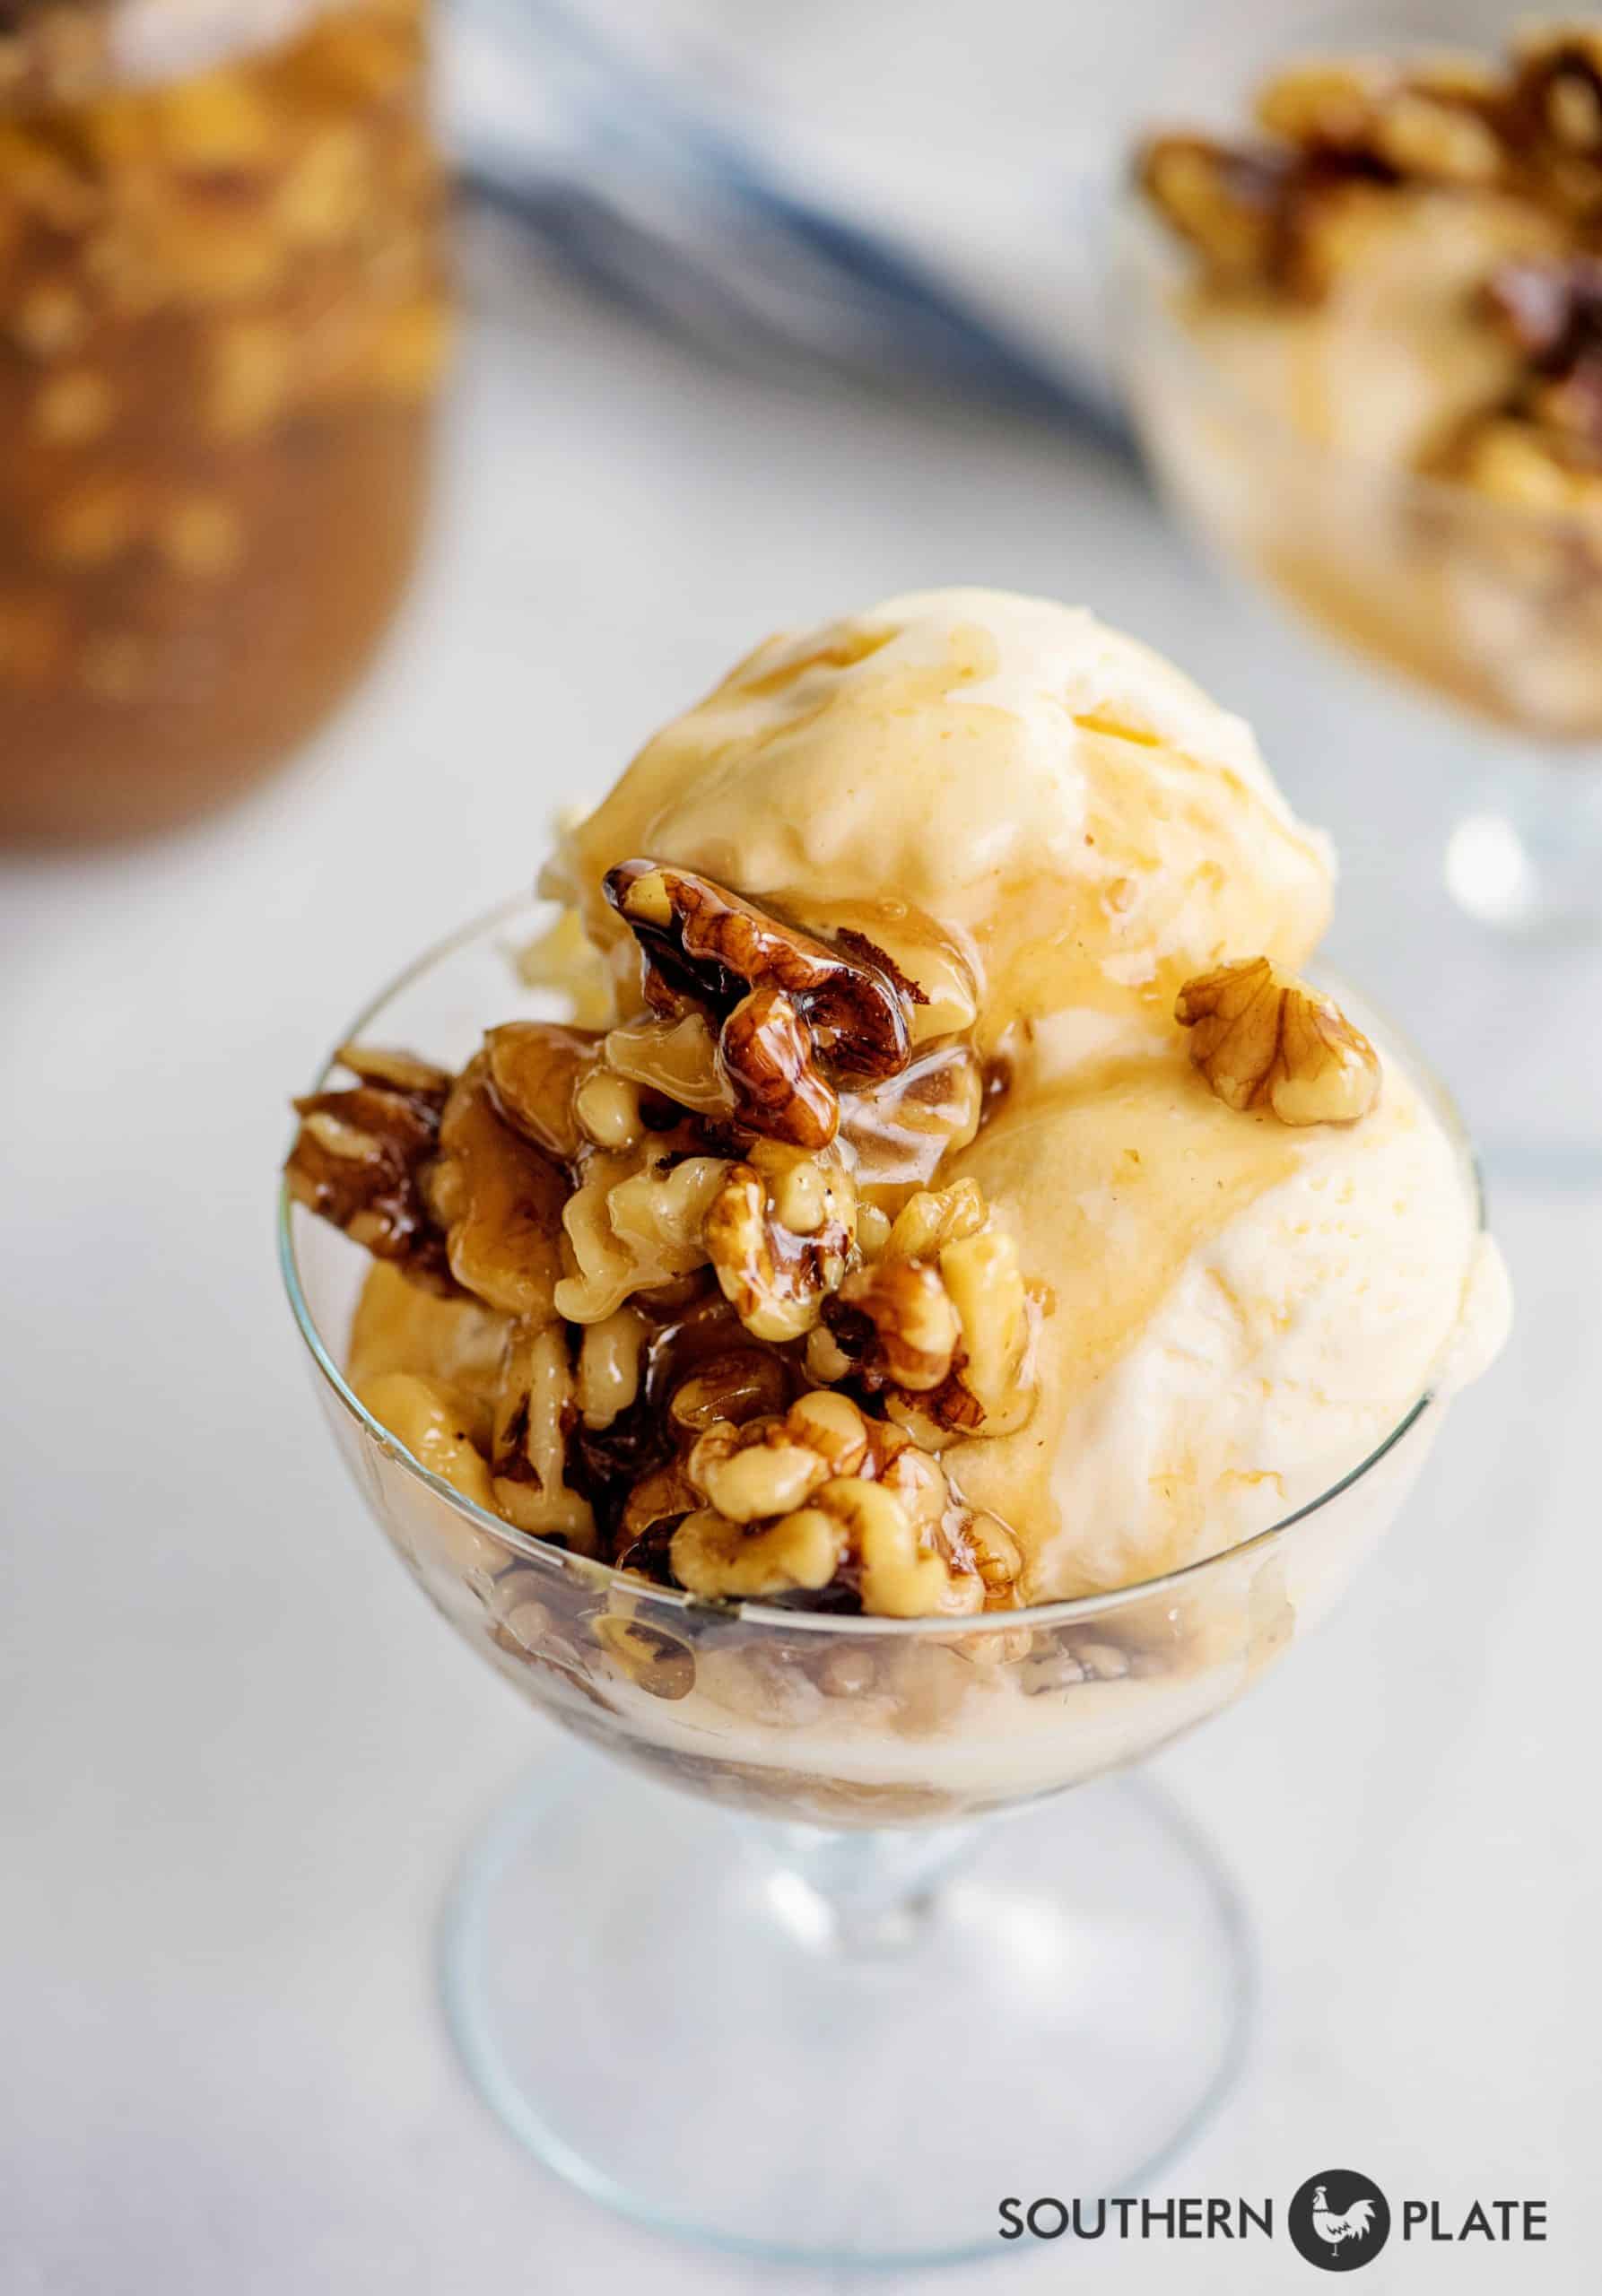 Walnuts in Syrup For Ice Cream Sundaes